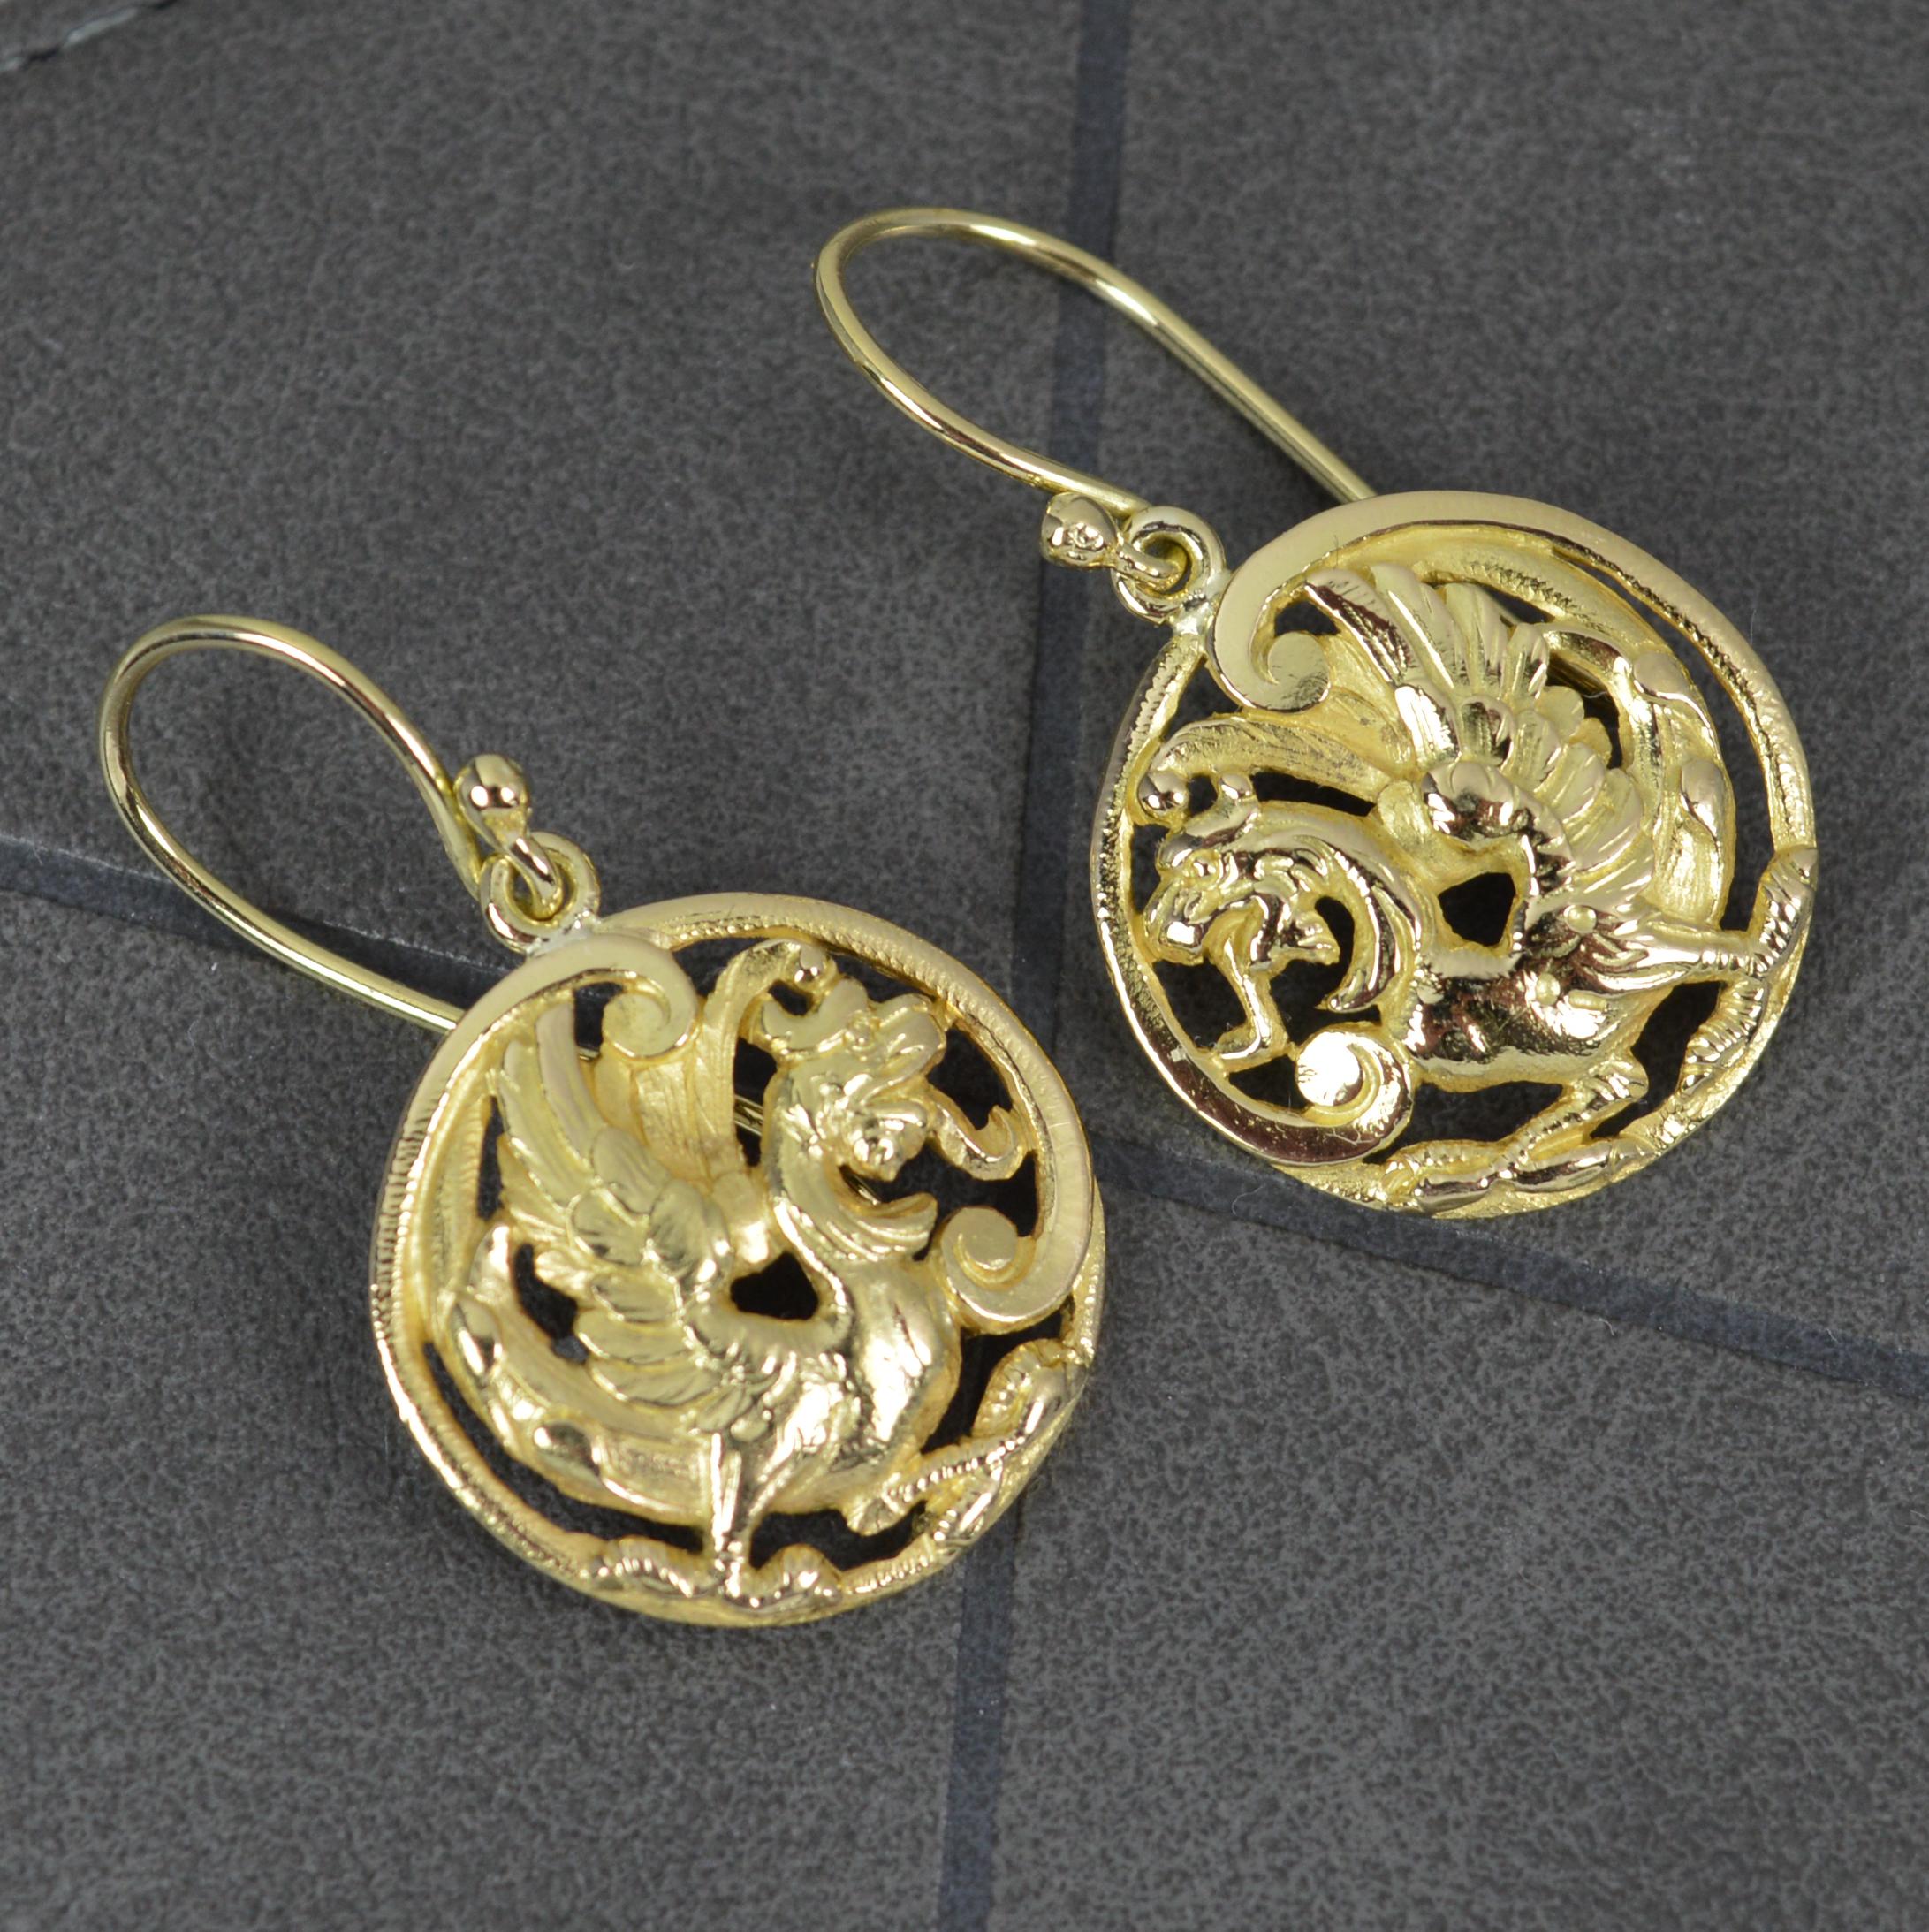 A stunning pair of antique earrings, late Victorian c1880.
Solid 18 carat yellow gold disc panels and hook backs.
The pierced circular discs are pierced with a phoenix / griffin type creature facing one another.

CONDITION ; Very good for age. Clean